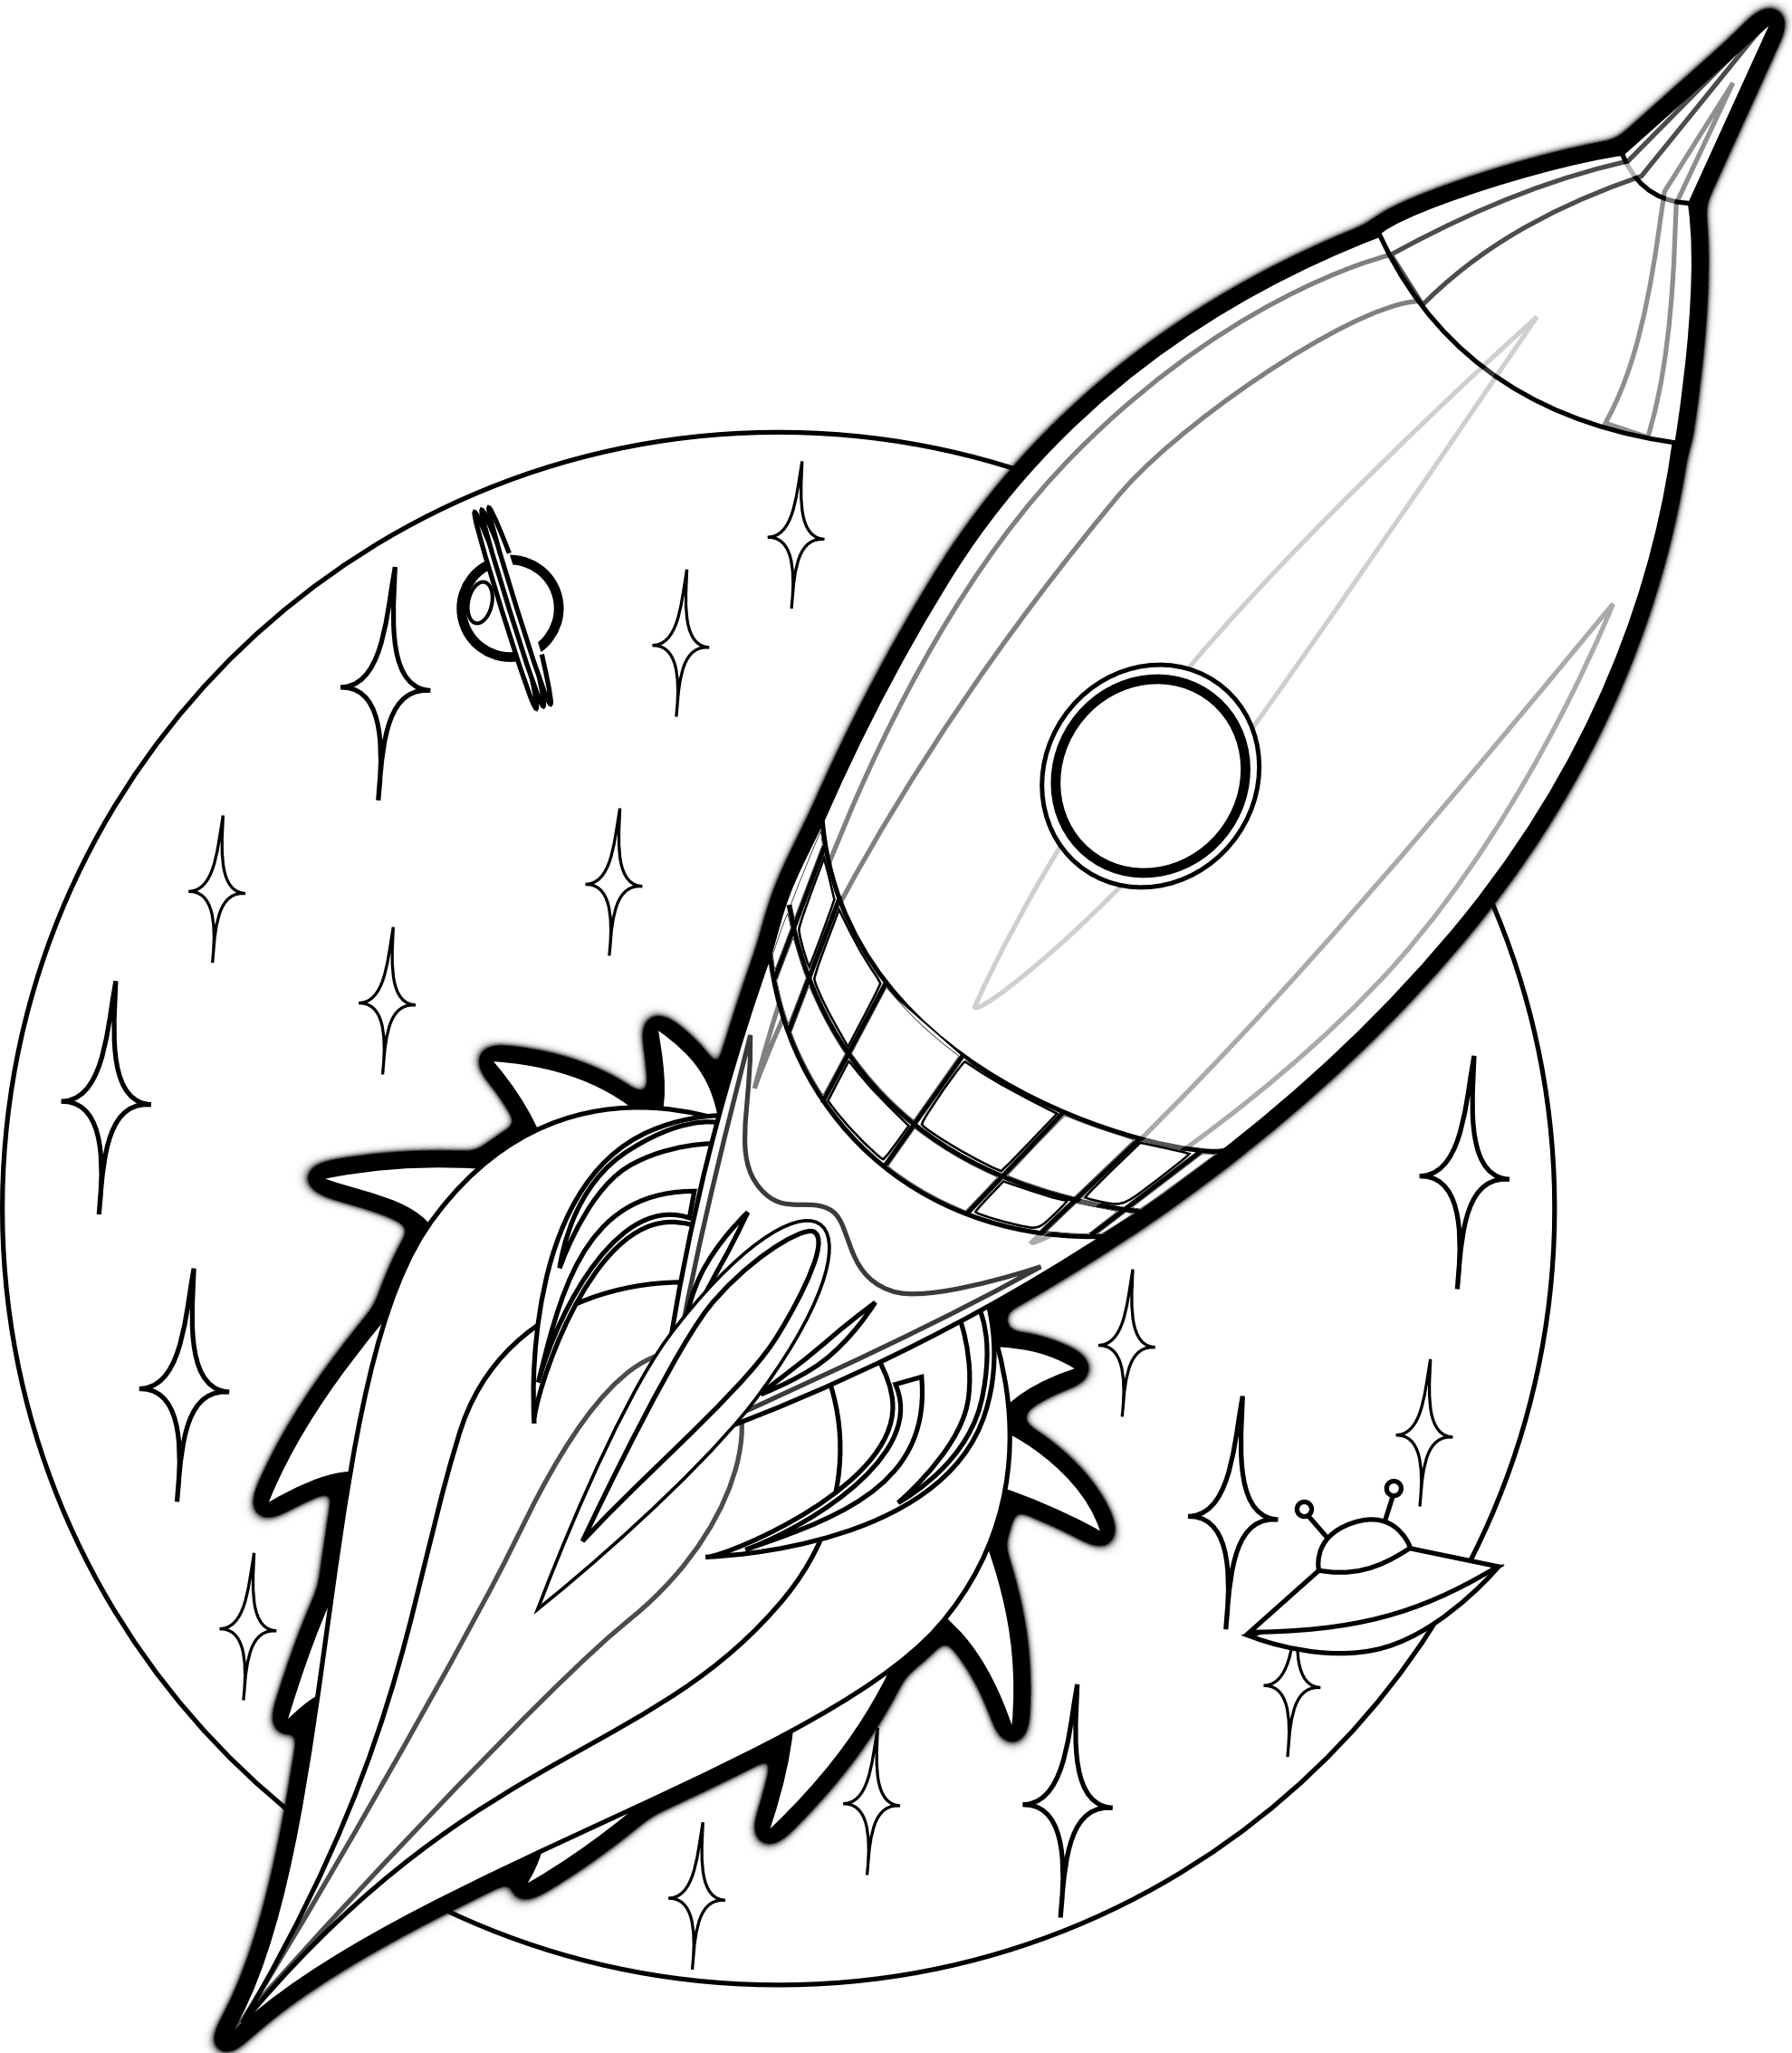 Cartoon image of rocket clipart clipartcow 2 